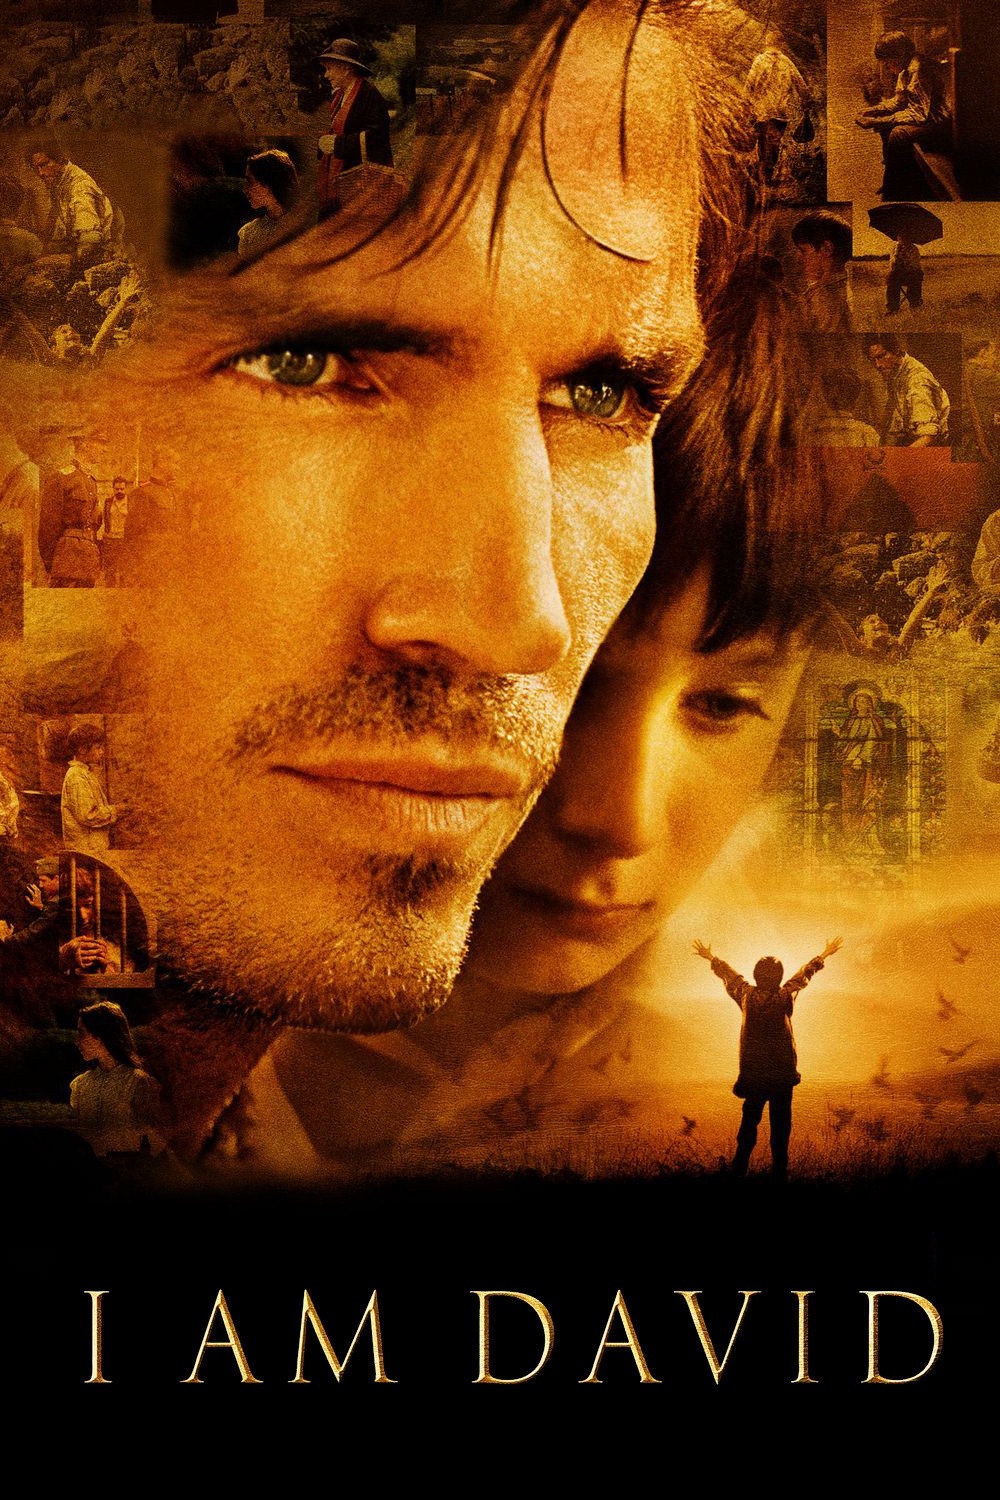 Poster for the movie "I Am David"